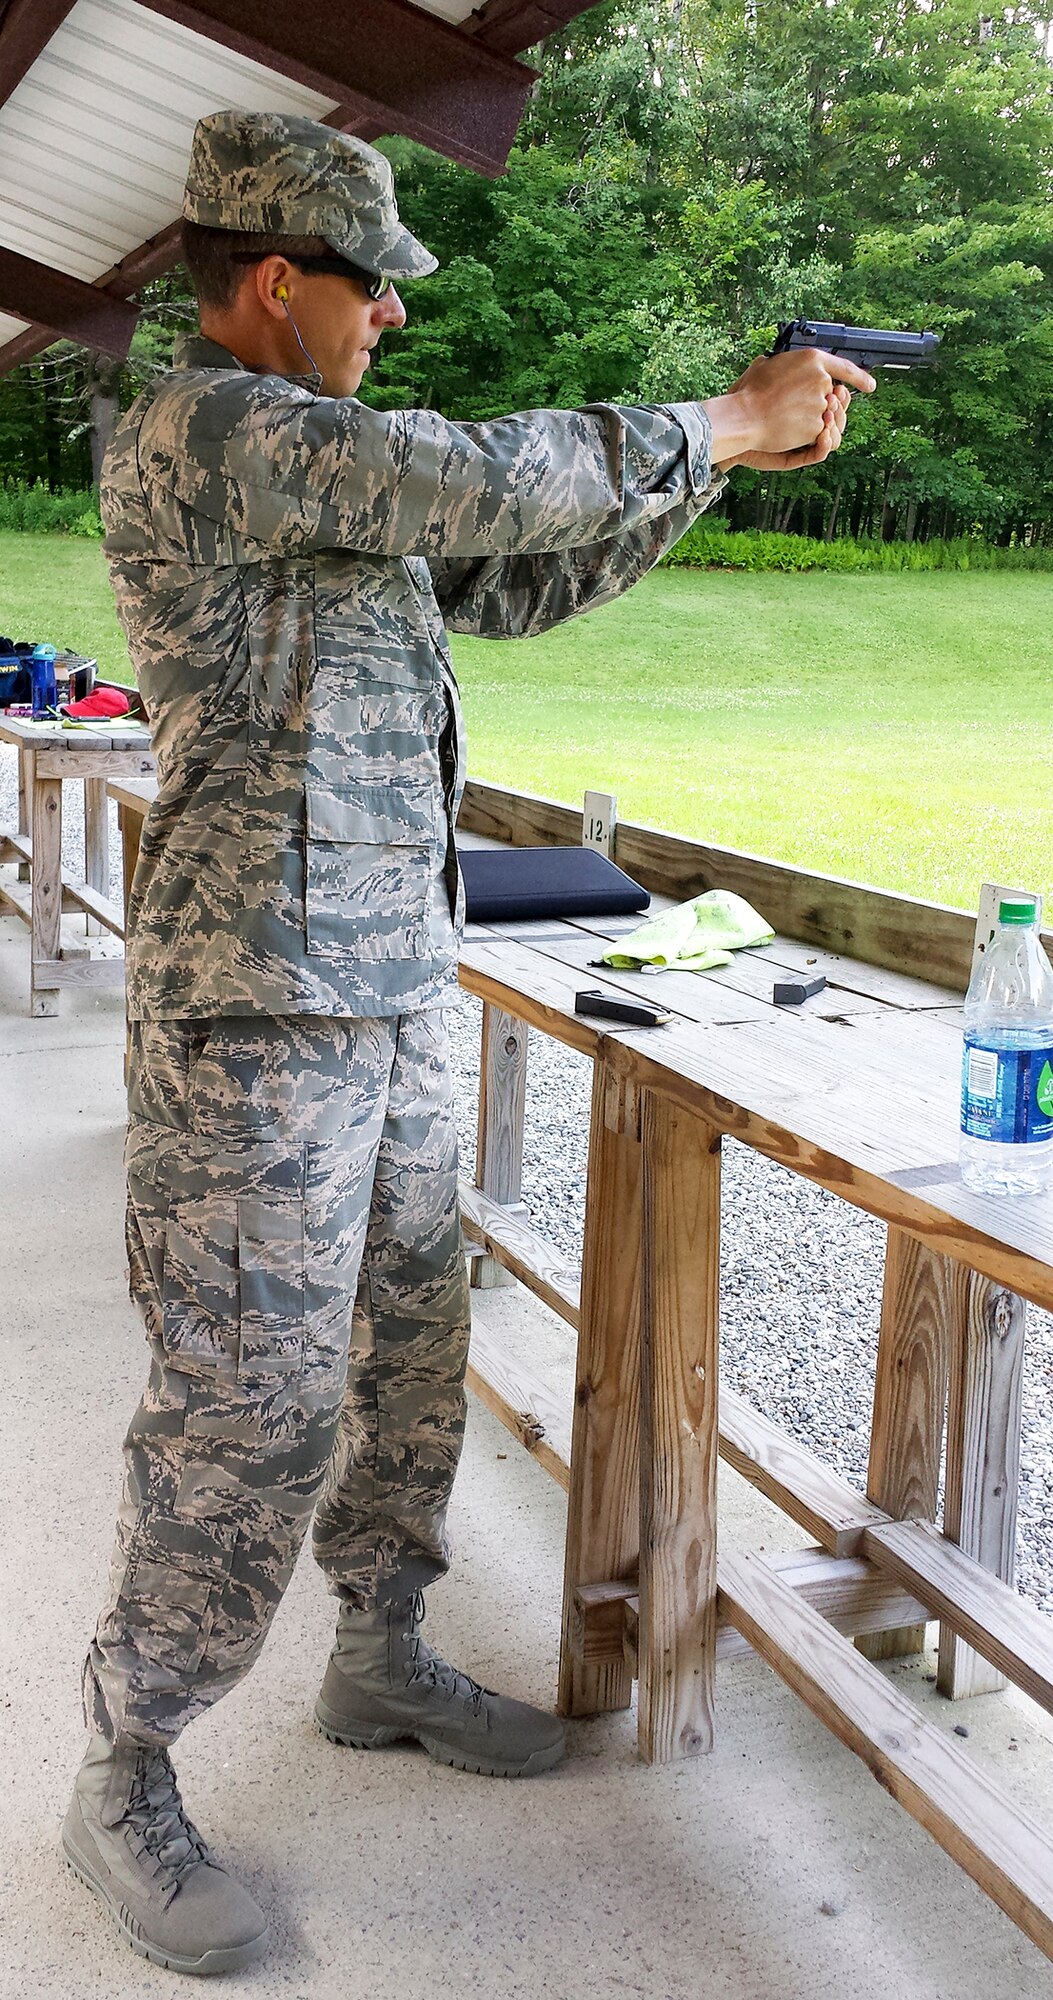 Maj. Peter Grossenbach, C-17 Globemaster III pilot with the 728th Airlift Squadron, performs pistol training during the Team USA Military training camp in Burlington, Vermont, in July. After trying out and qualifying for the team, Grossenbach went on to compete in the Interallied Confederation of Reserve Officers, or CIOR, military competition in Shumen, Bulgaria, Aug. 3-9. He represented the U.S. as part of an international team and won third place in the novice category. The pentathlon consists of: pistol shooting, rifle shooting, 500-meter land obstacle course, 50-meter water obstacle course, and up to a 15-kilometer orienteering, or land-navigation, event that also encompasses combat first aid. According to the CIOR Web site, the competition focuses on military skills that truly challenge the leadership and physical robustness of reservists. (U.S. Air Force Reserve photo by Maj. Mike Masuda)